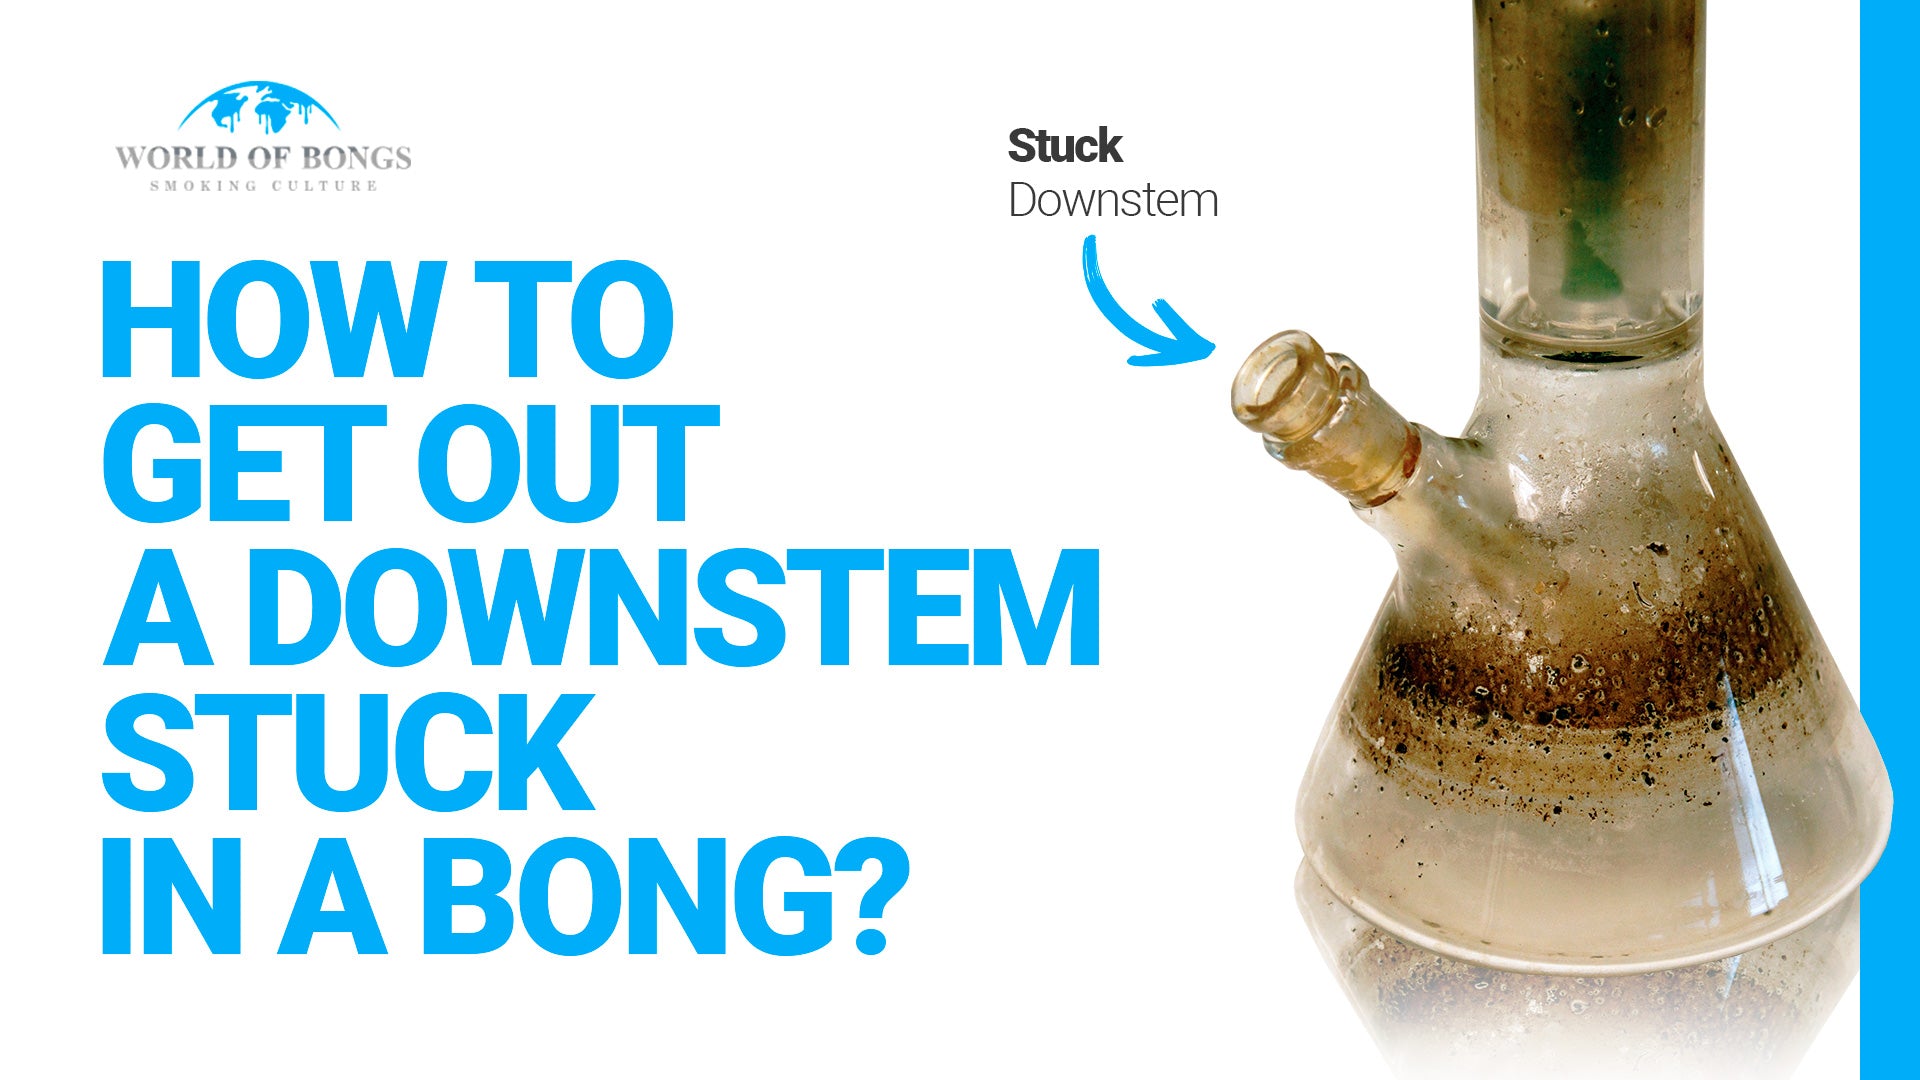 How To Get Out A Downstem Stuck in A Bong?